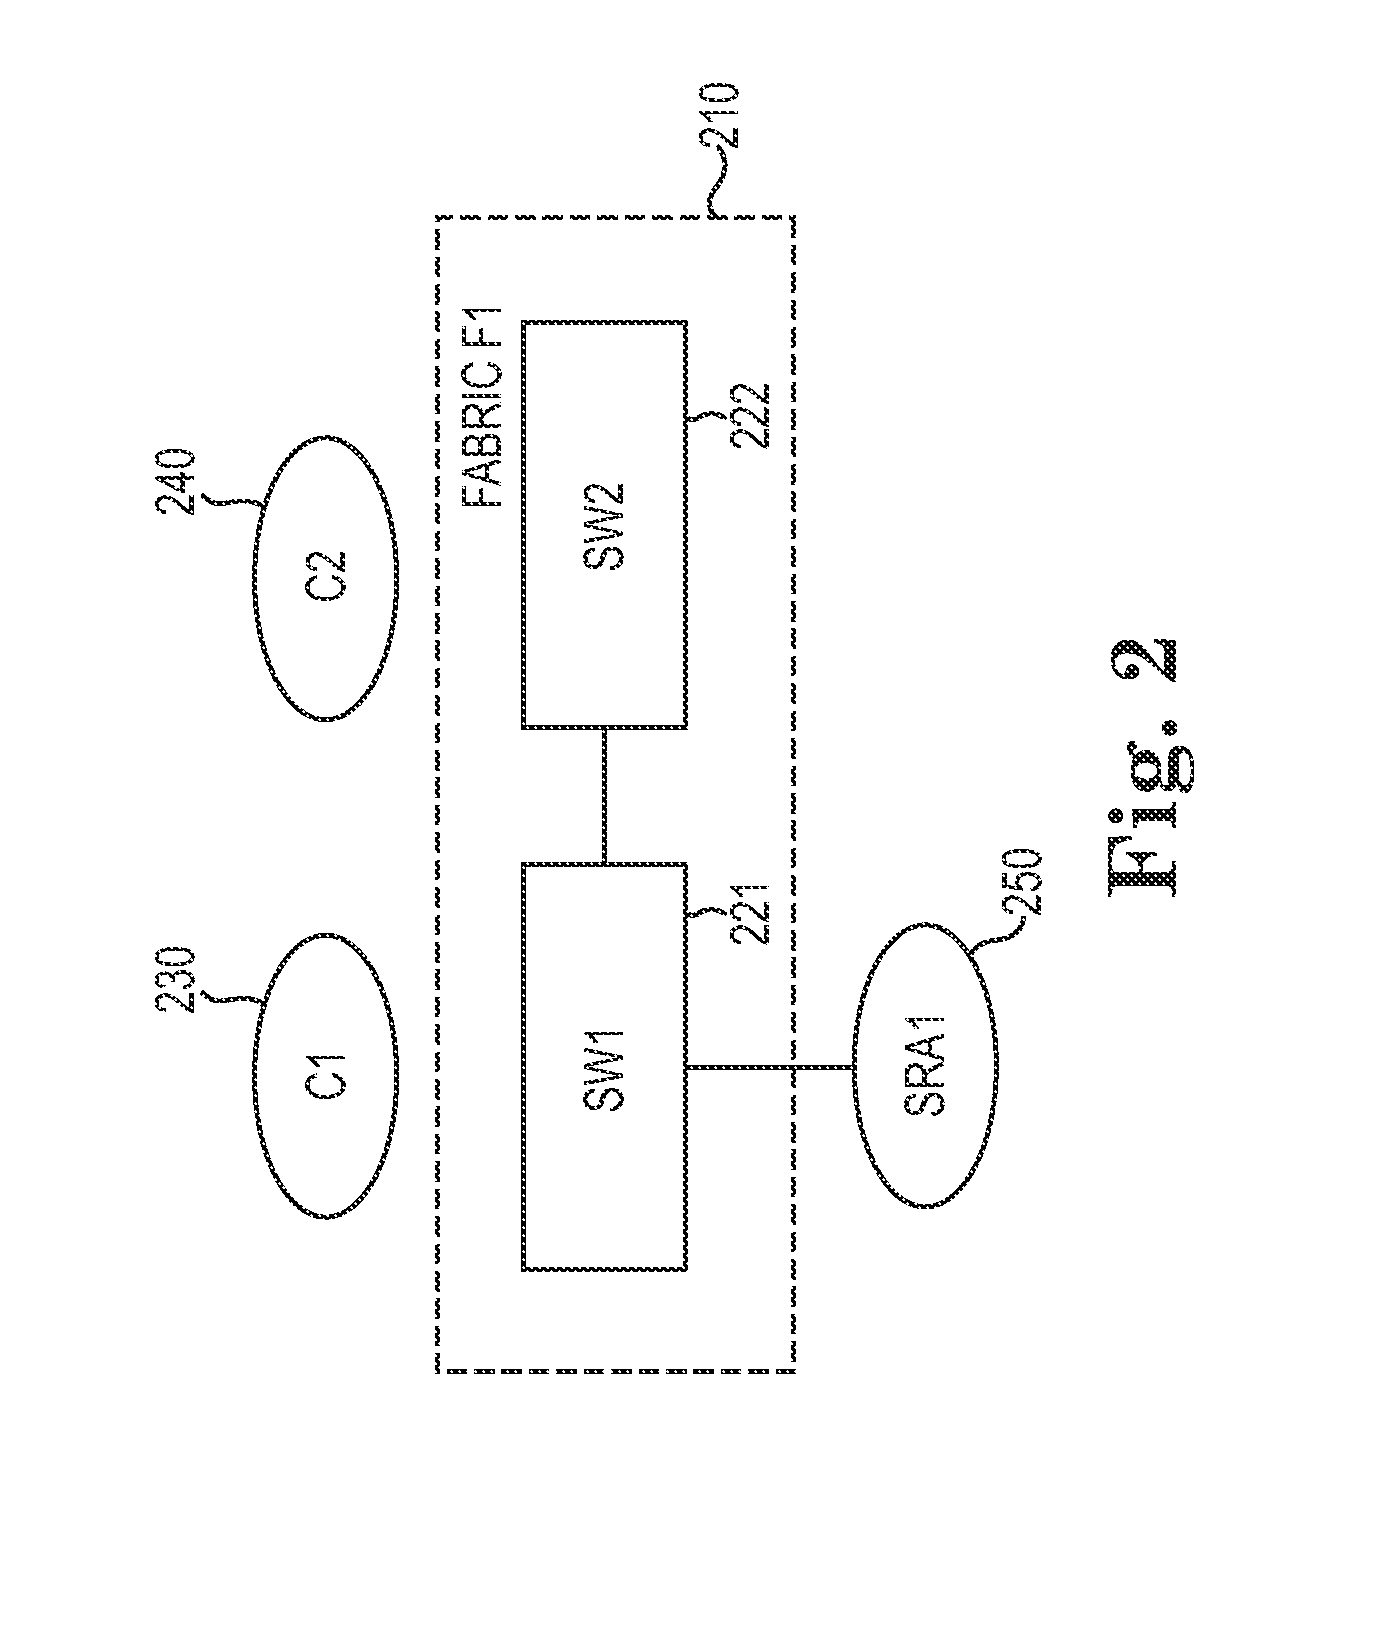 Method of determining equivalent subsets of agents to gather information for a fabric